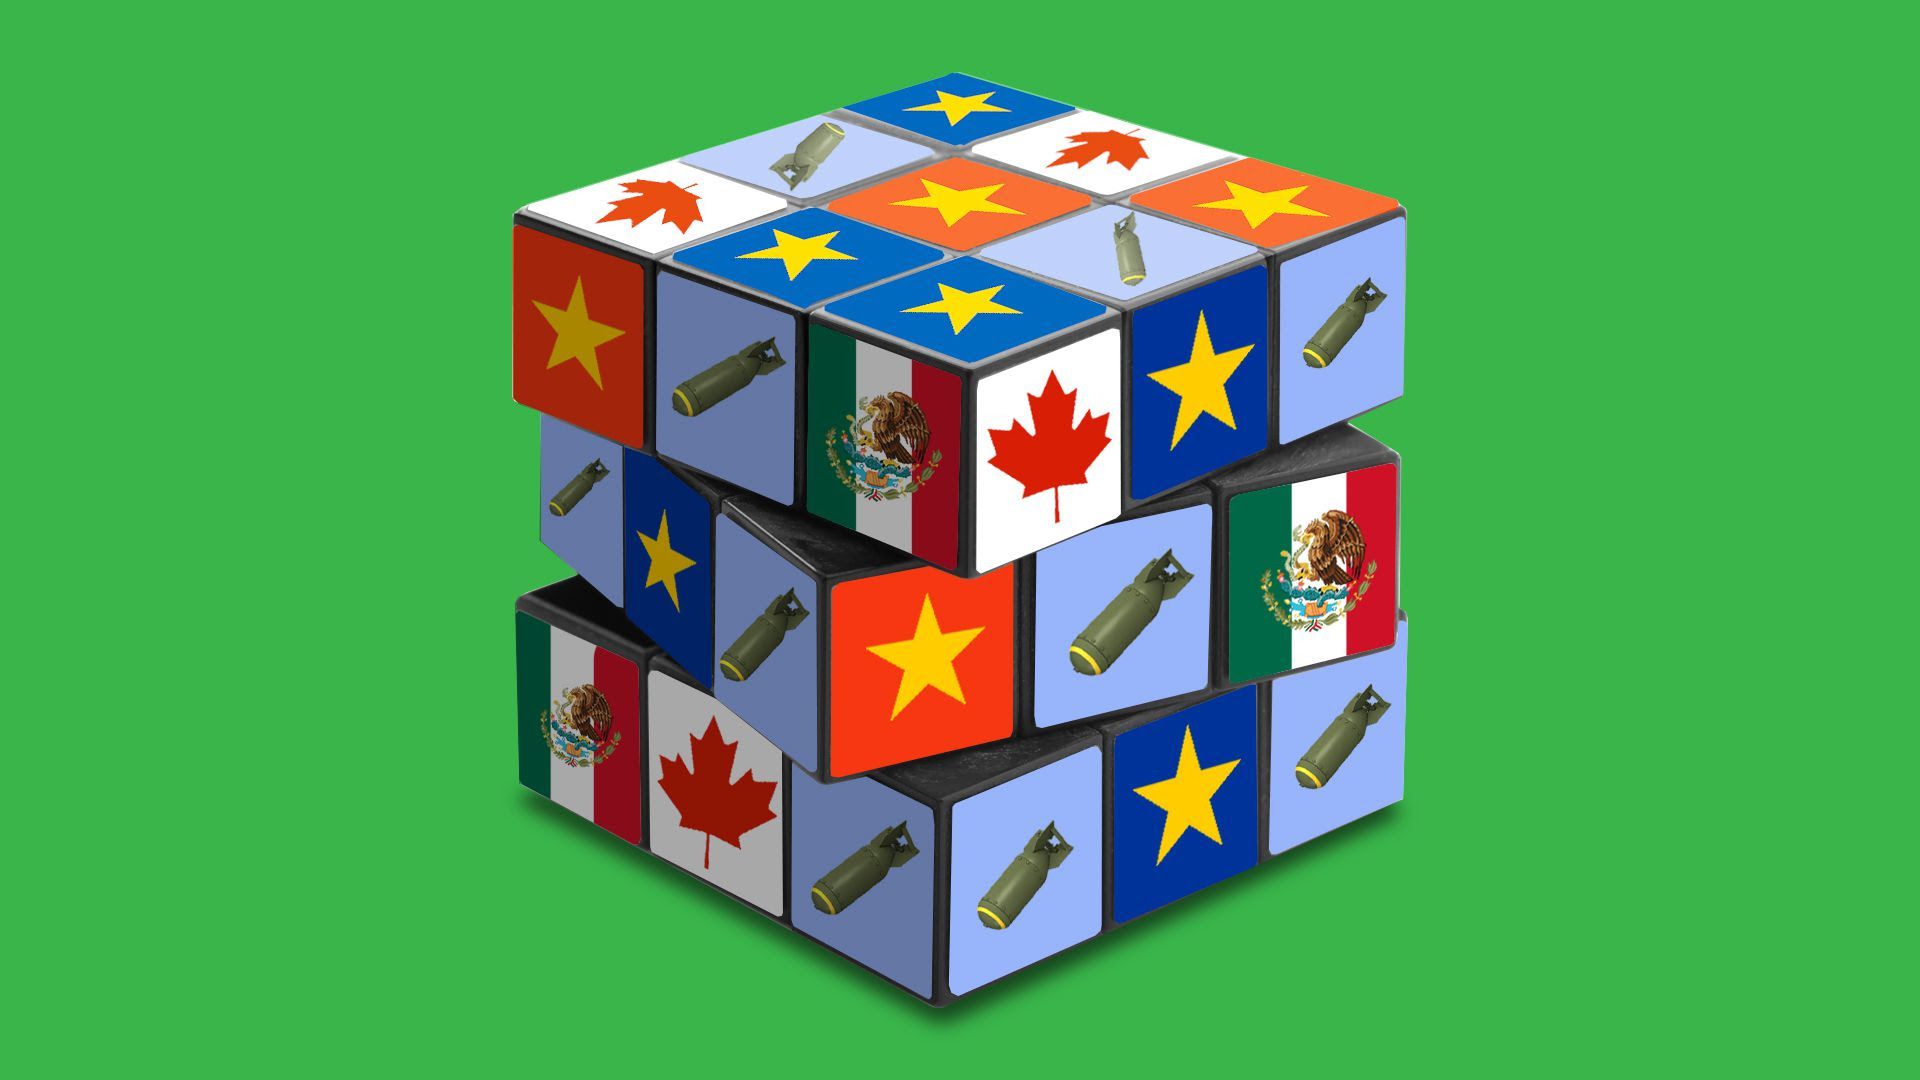 An illustration of a rubik's cube with Canada's and Mexico's flags on the blocks.